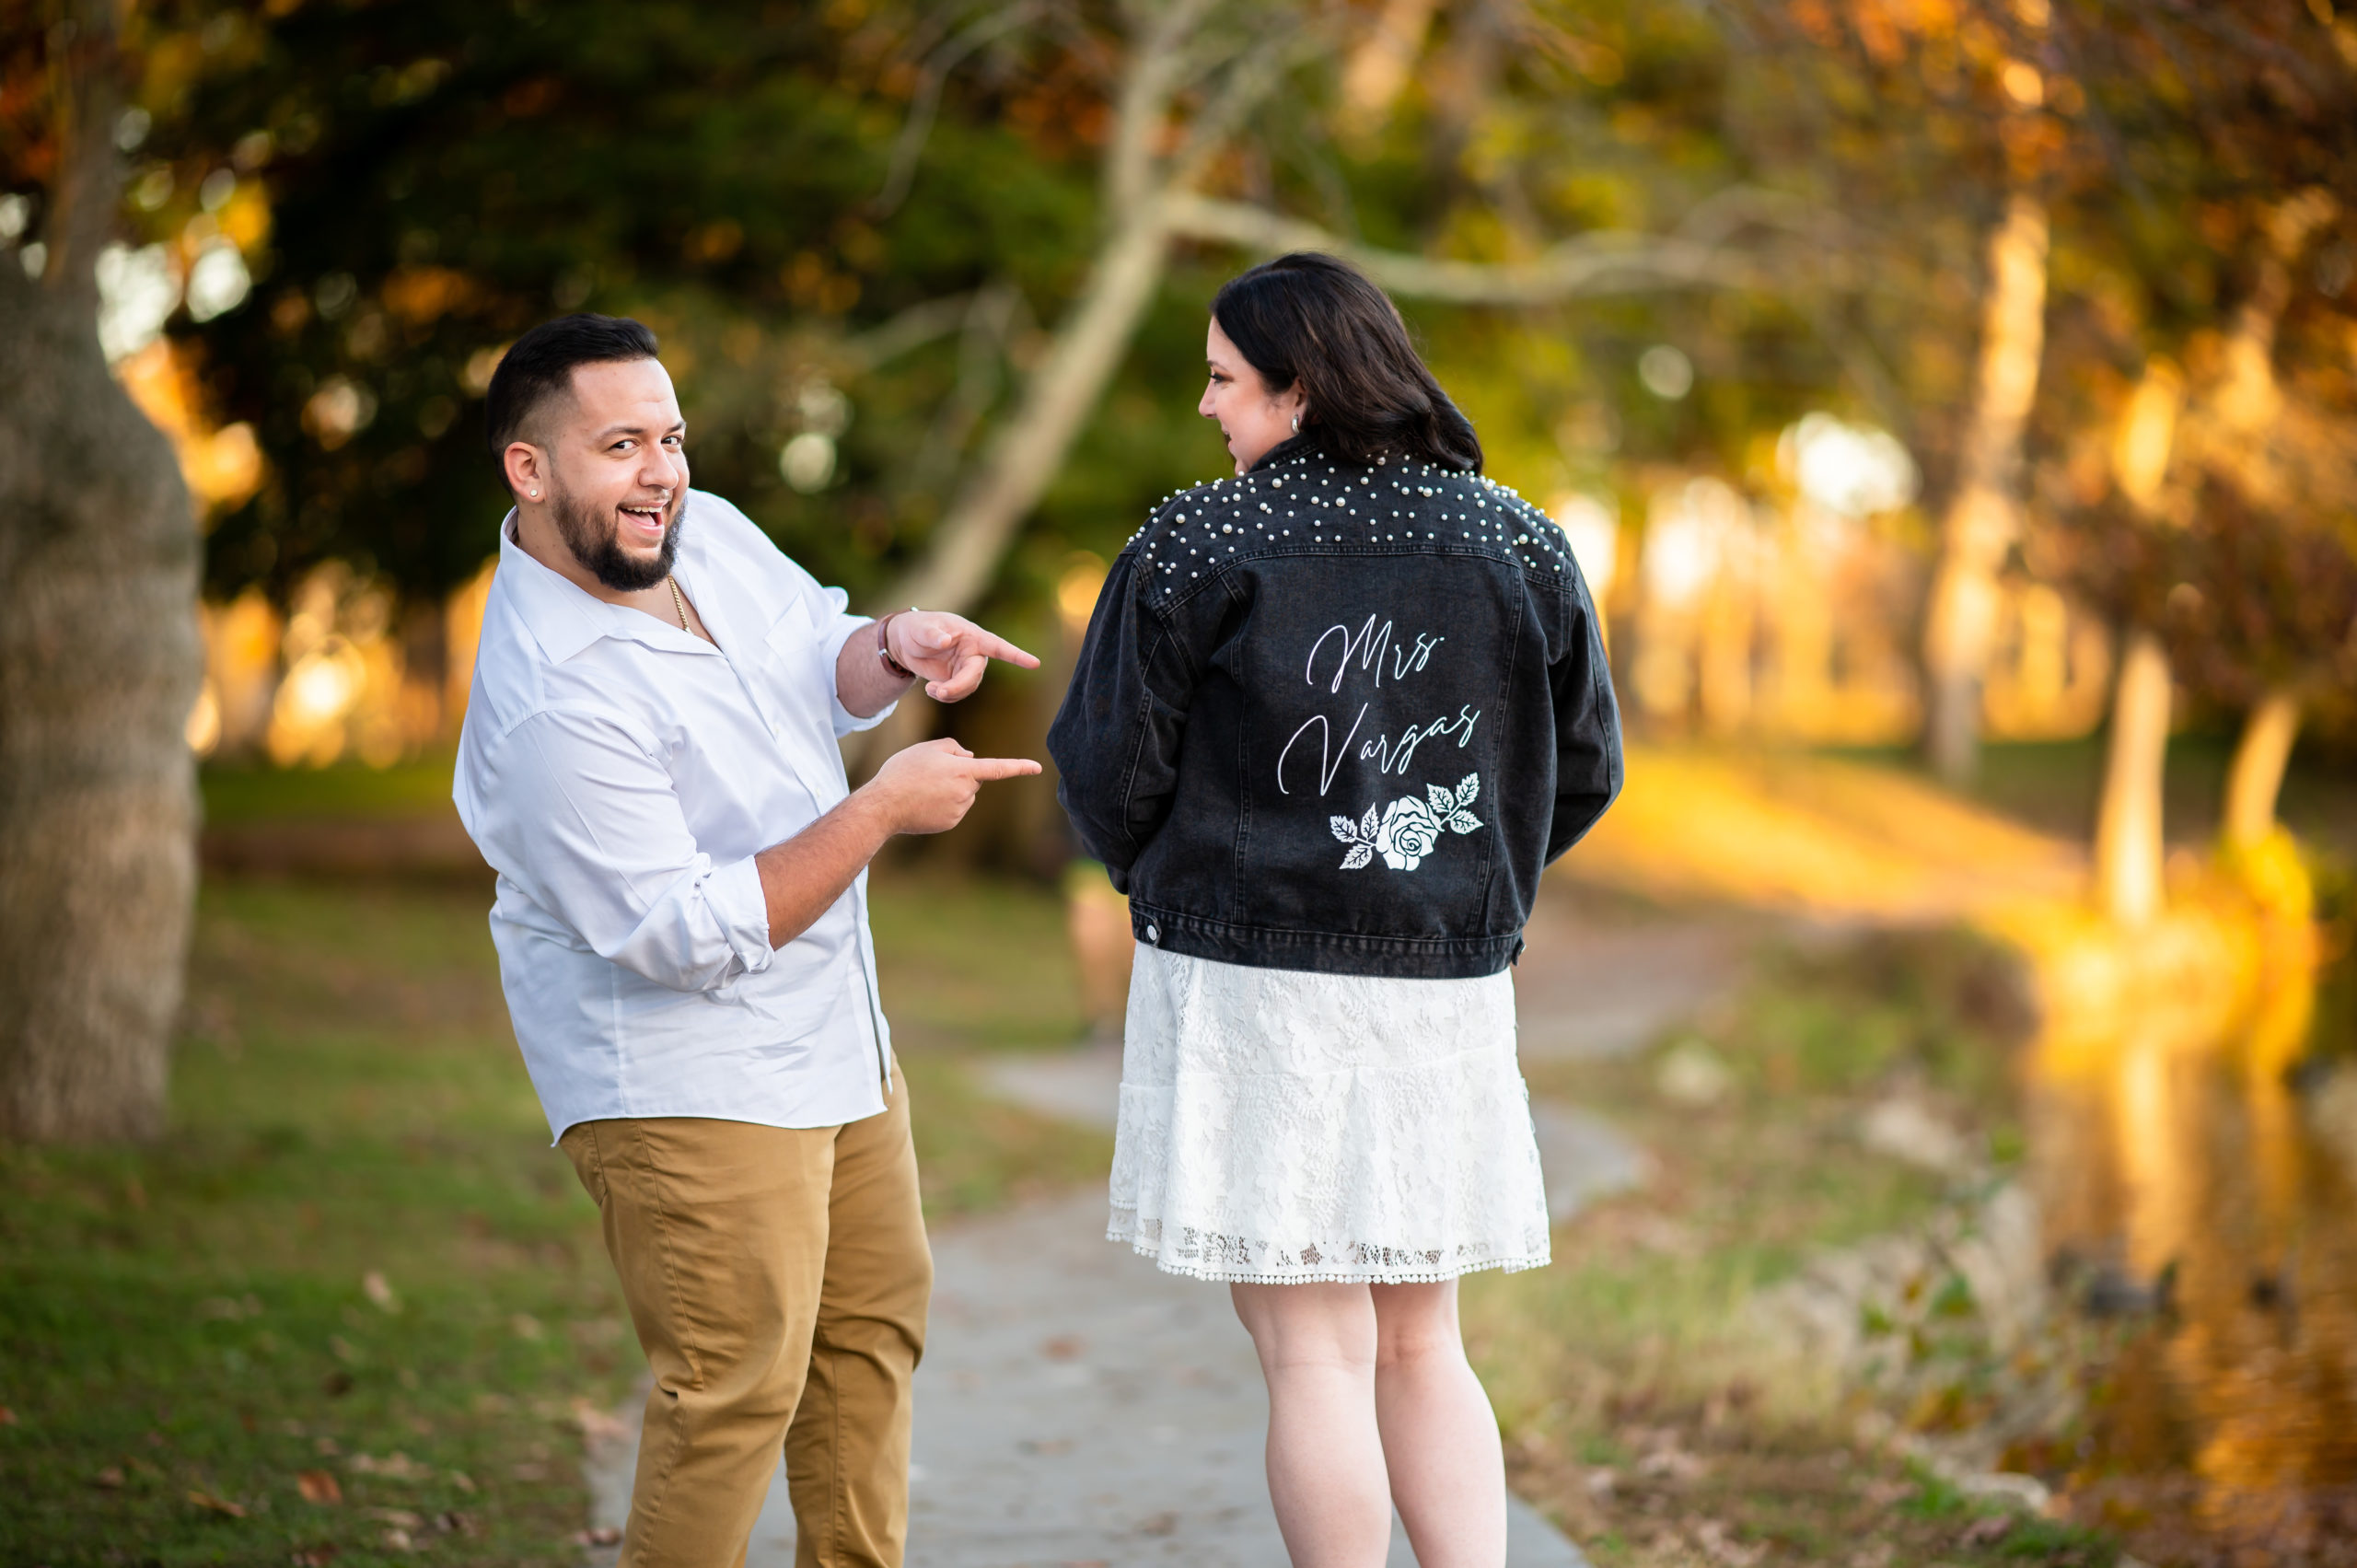 Spring Lake engagement session with the bride wearing a jean jacket with her new last name on it.